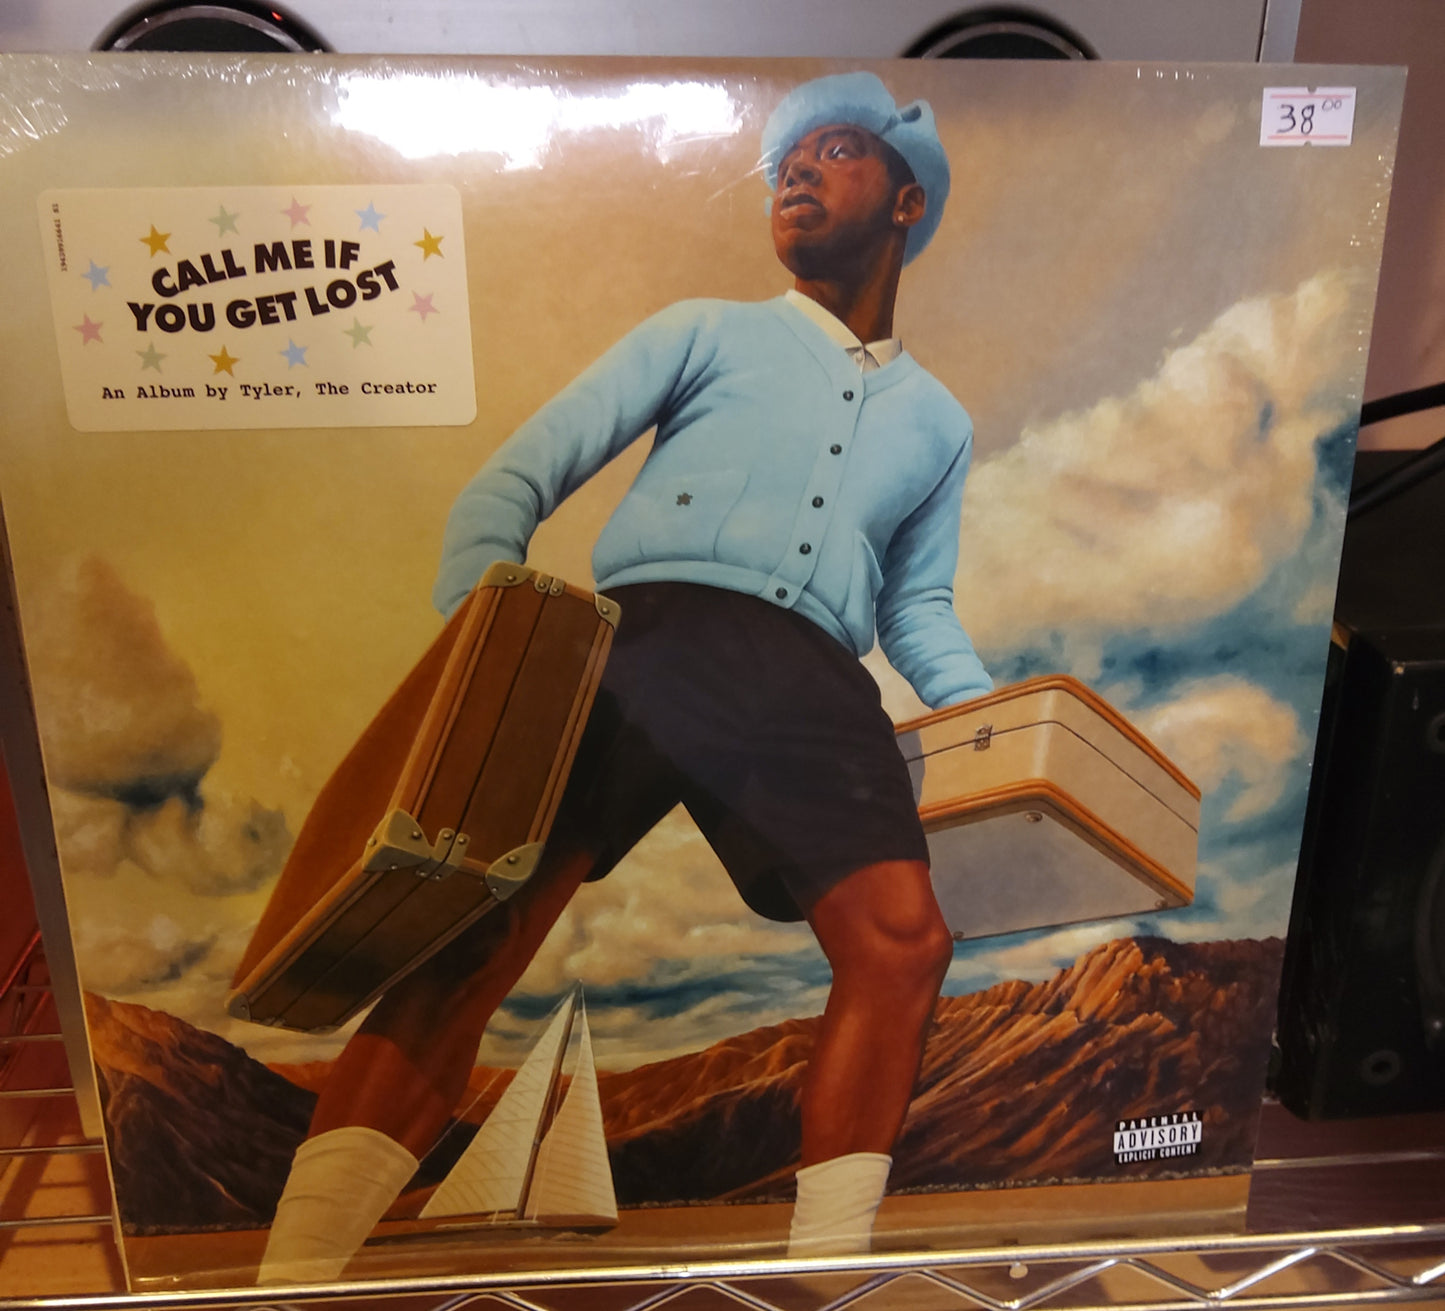 Tyler The Creator, "Call Me When You Get Lost", (Sealed Vinyl, 2021)